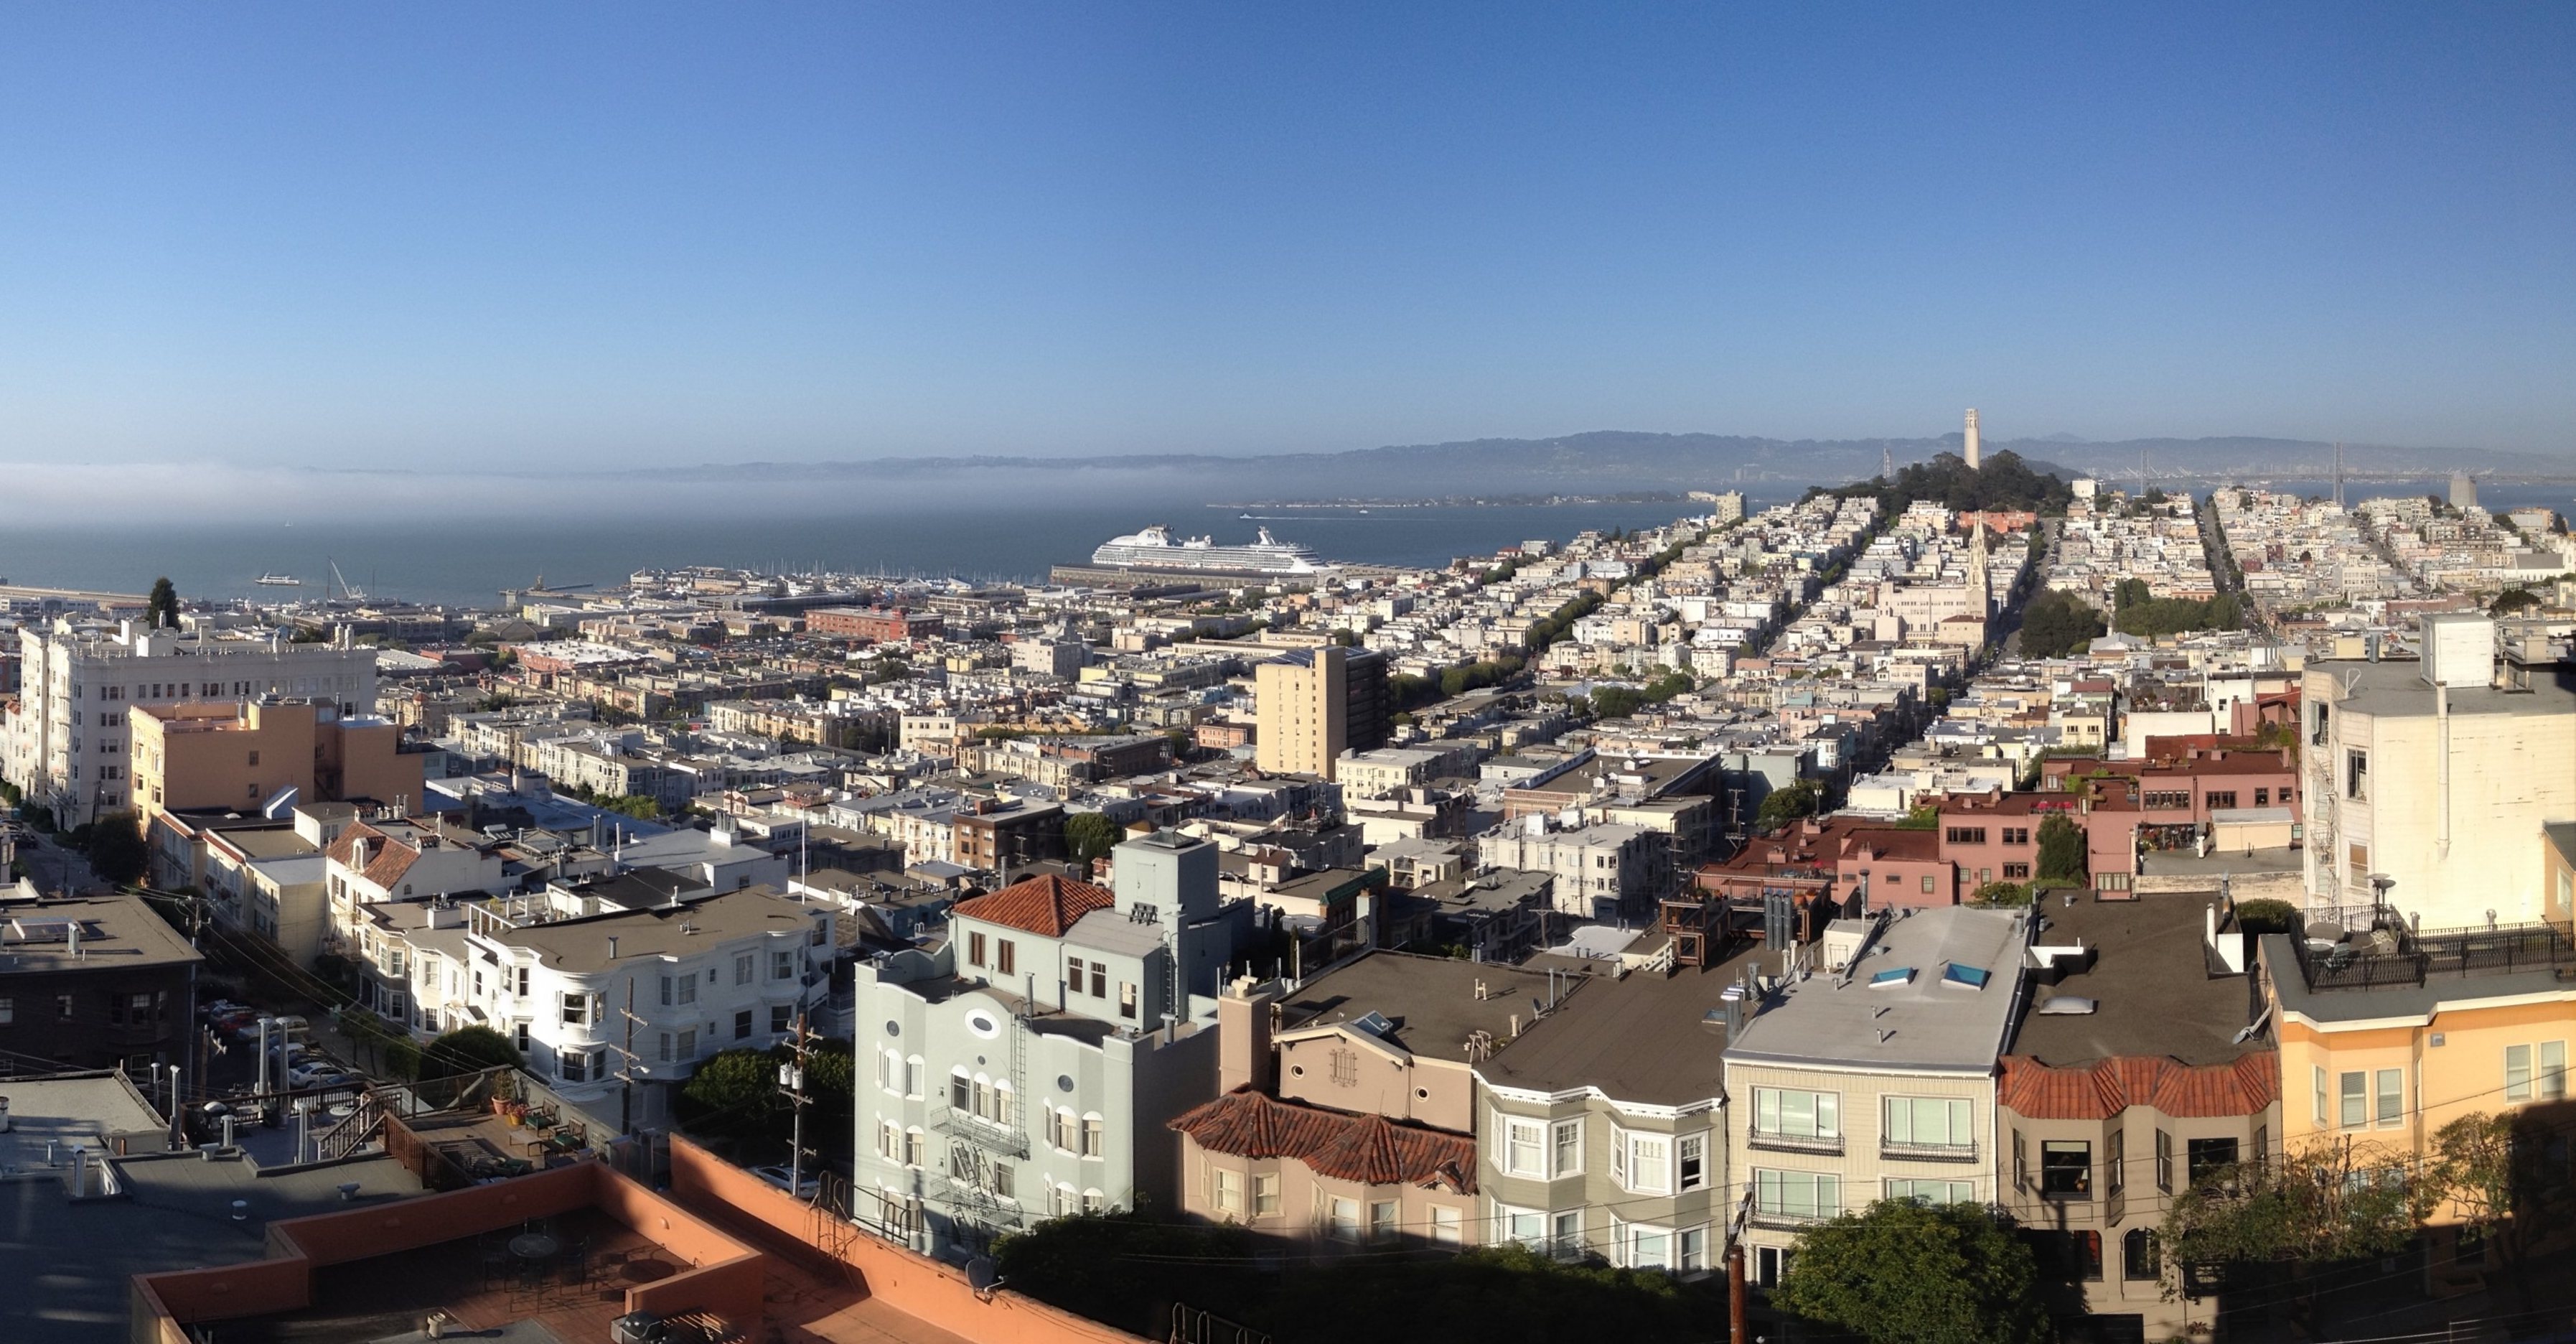 SF’s Top Neighborhoods Are the Marina, Noe Valley, Richmond, and the Sunset…For Now